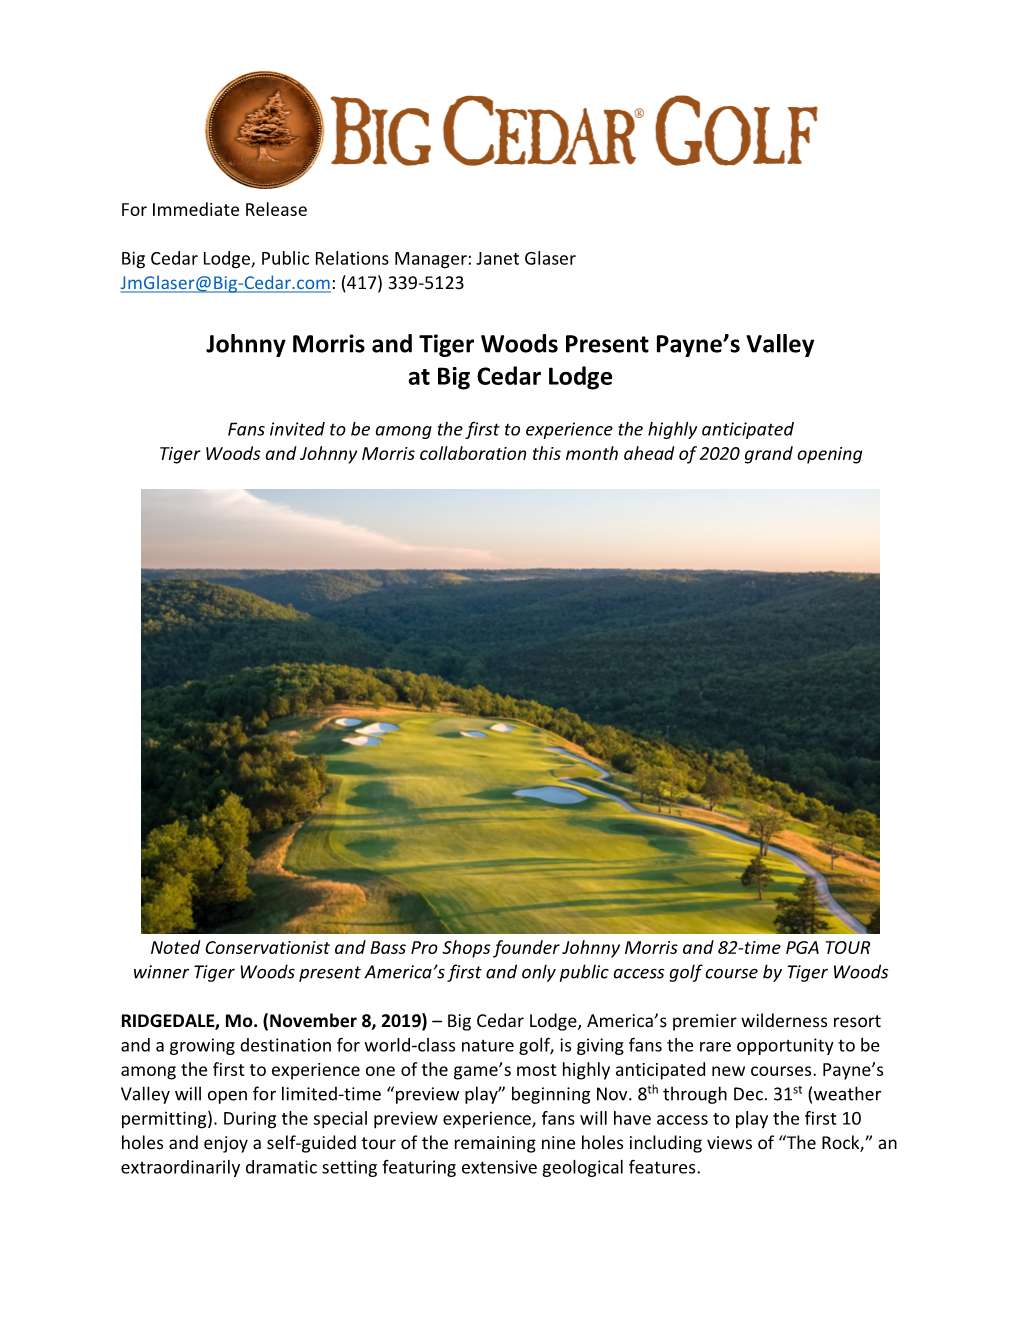 Johnny Morris and Tiger Woods Present Payne's Valley at Big